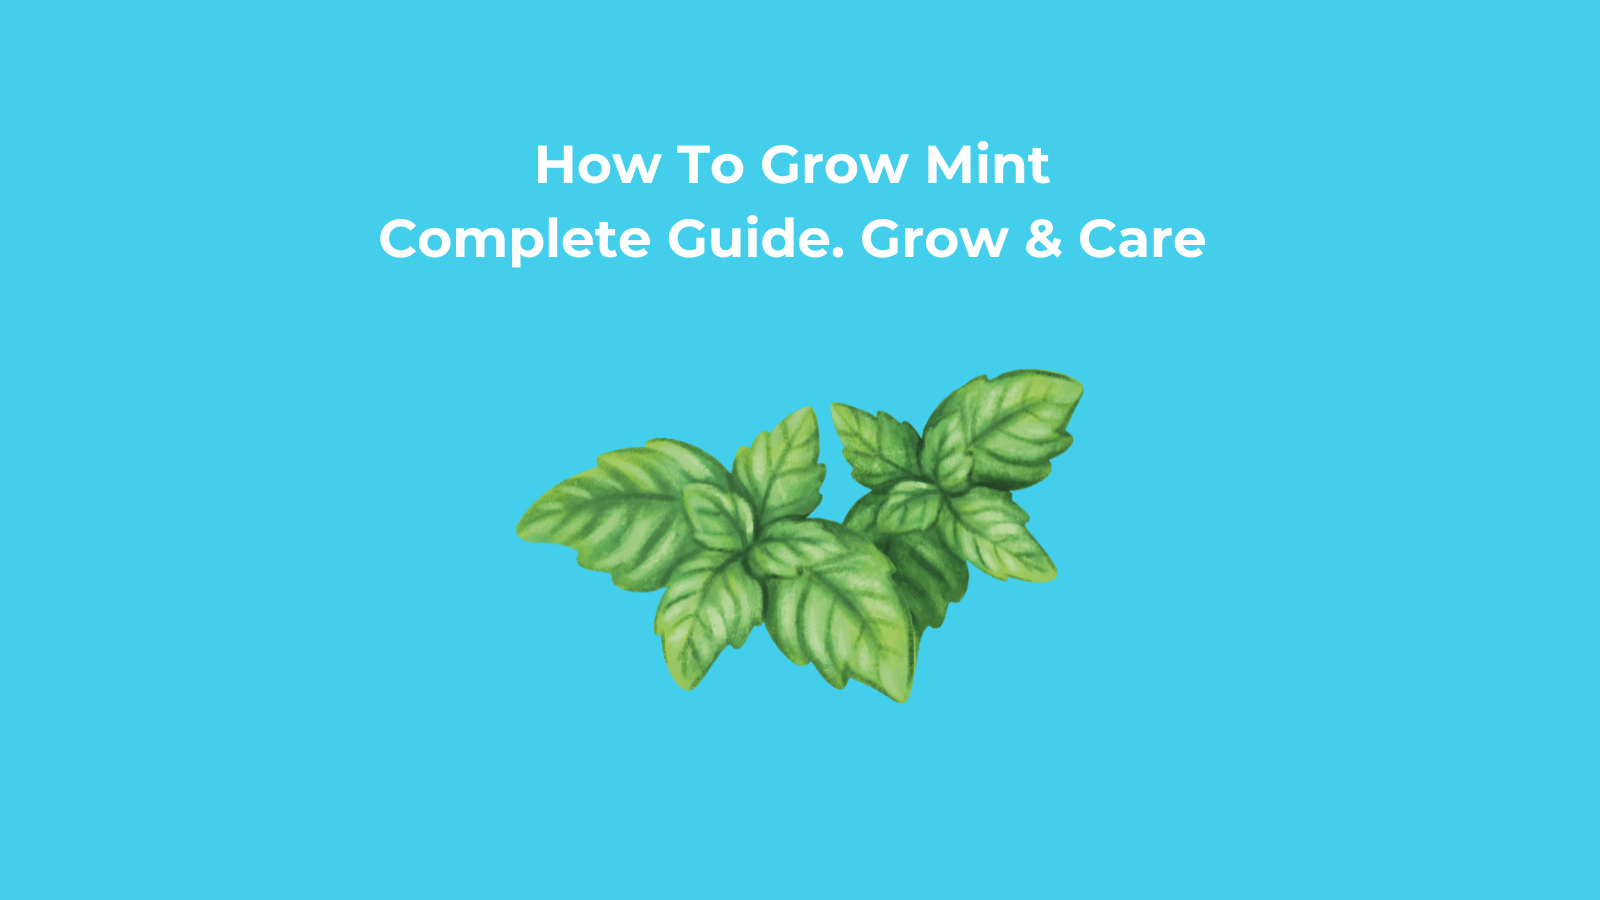 How to Grow Mint - Complete Guide. Grow & Care